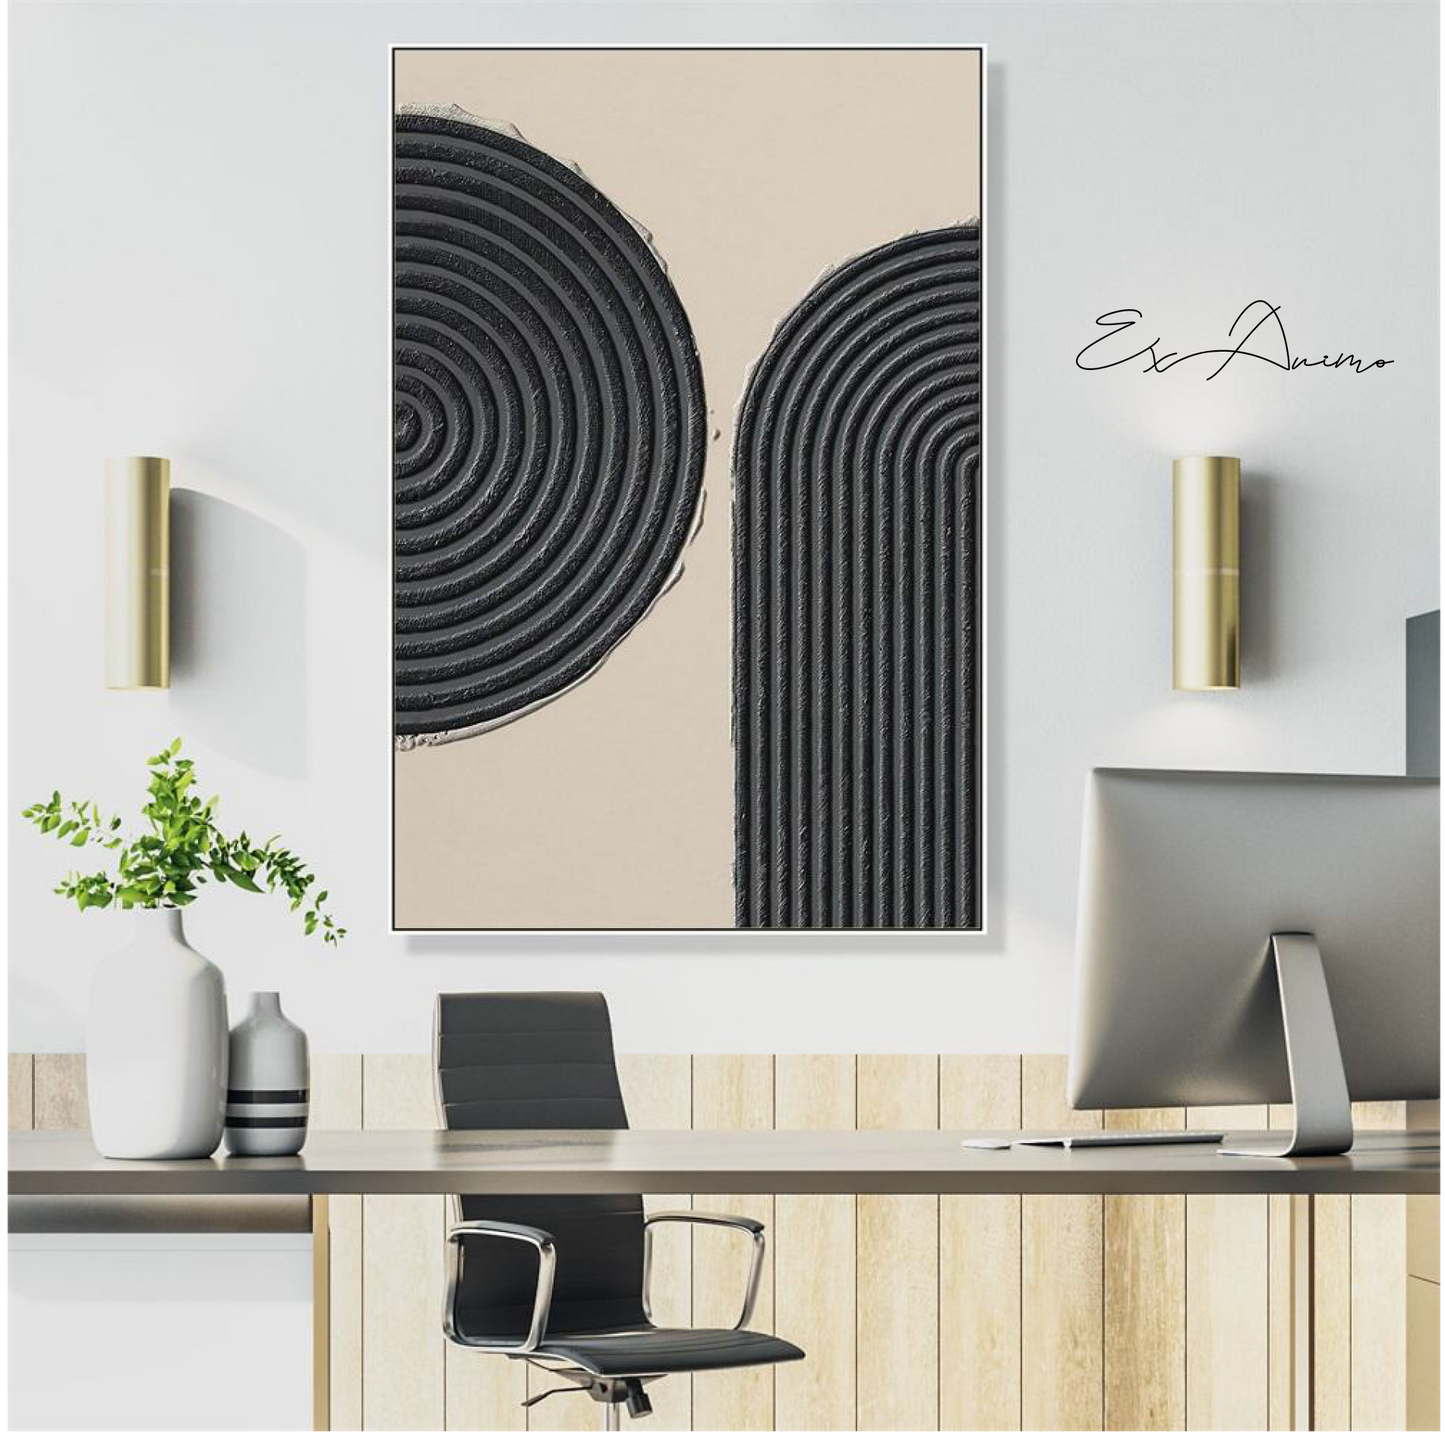 Ex Animo Designs - Abstract Geometric Black Bow Canvas Painting